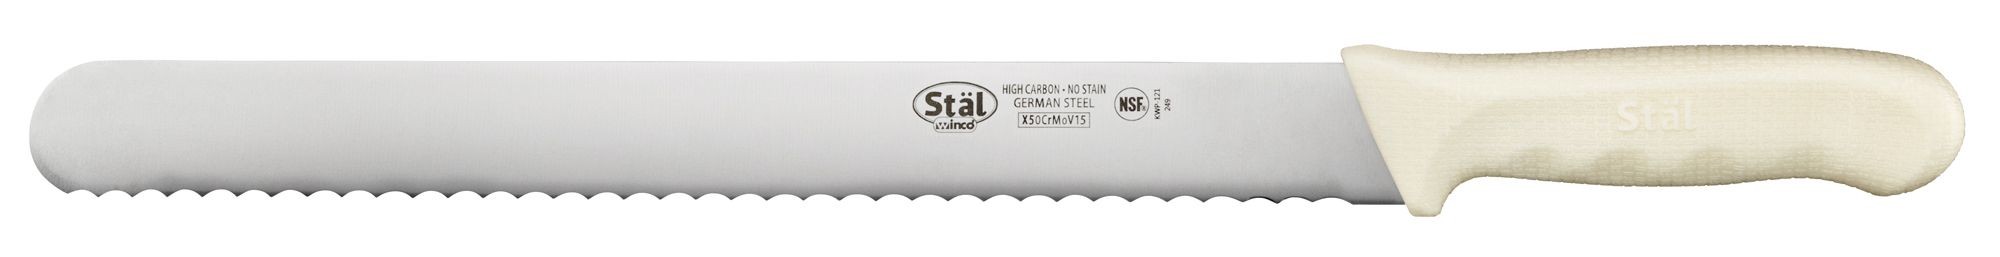 https://www.lionsdeal.com/itempics/Bread-Knife-With-White-Polypro-27882_xlarge.jpg